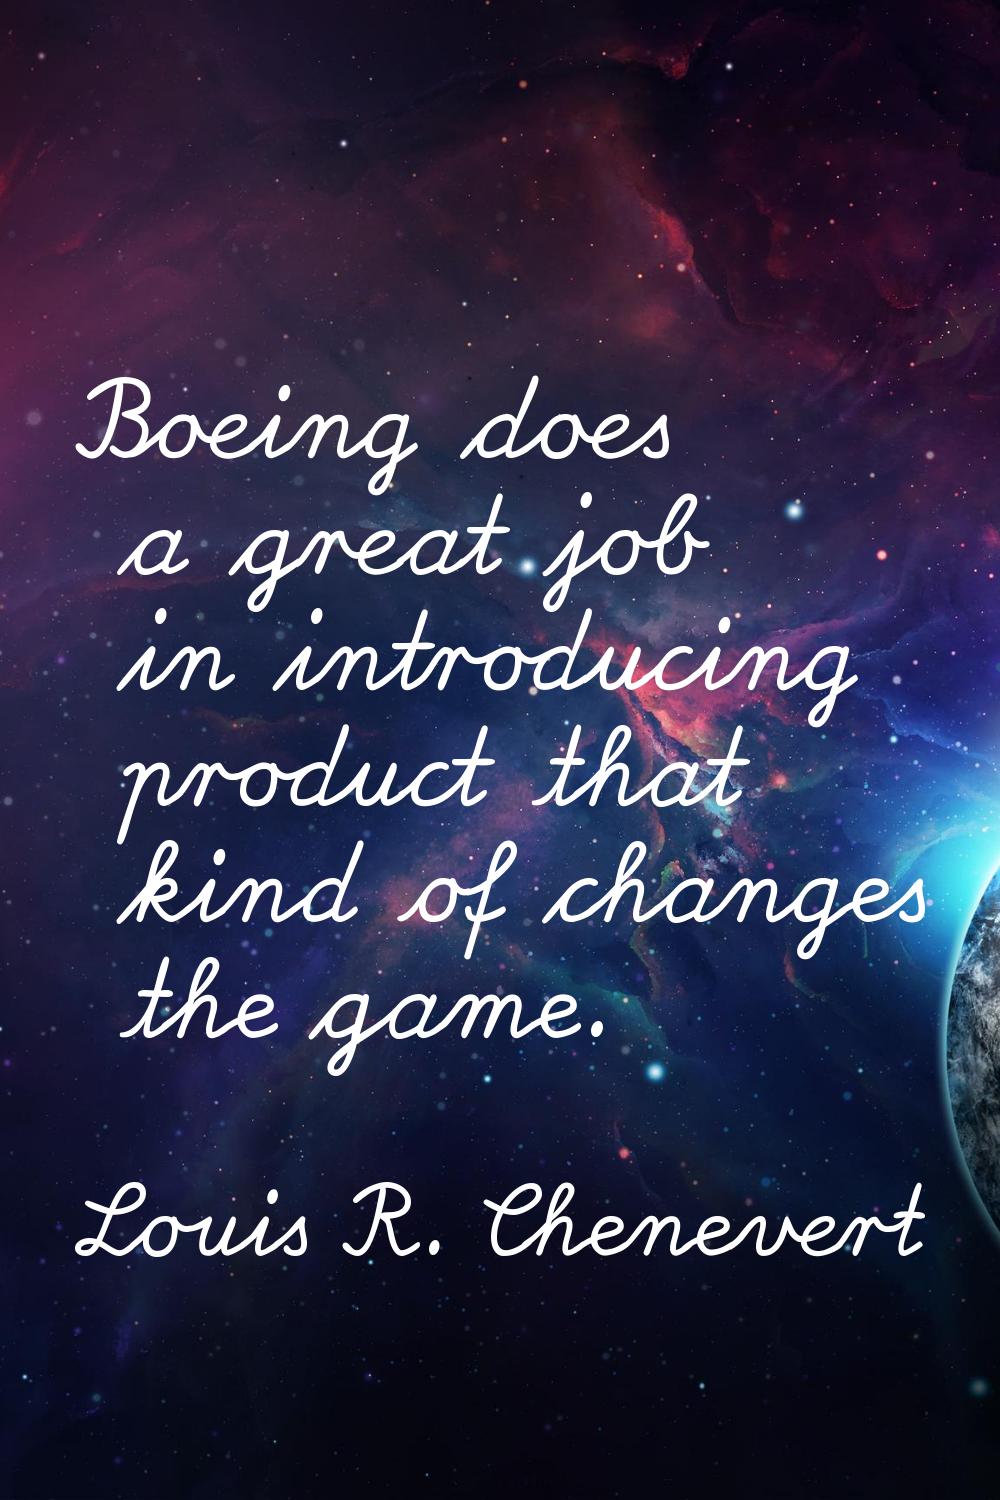 Boeing does a great job in introducing product that kind of changes the game.